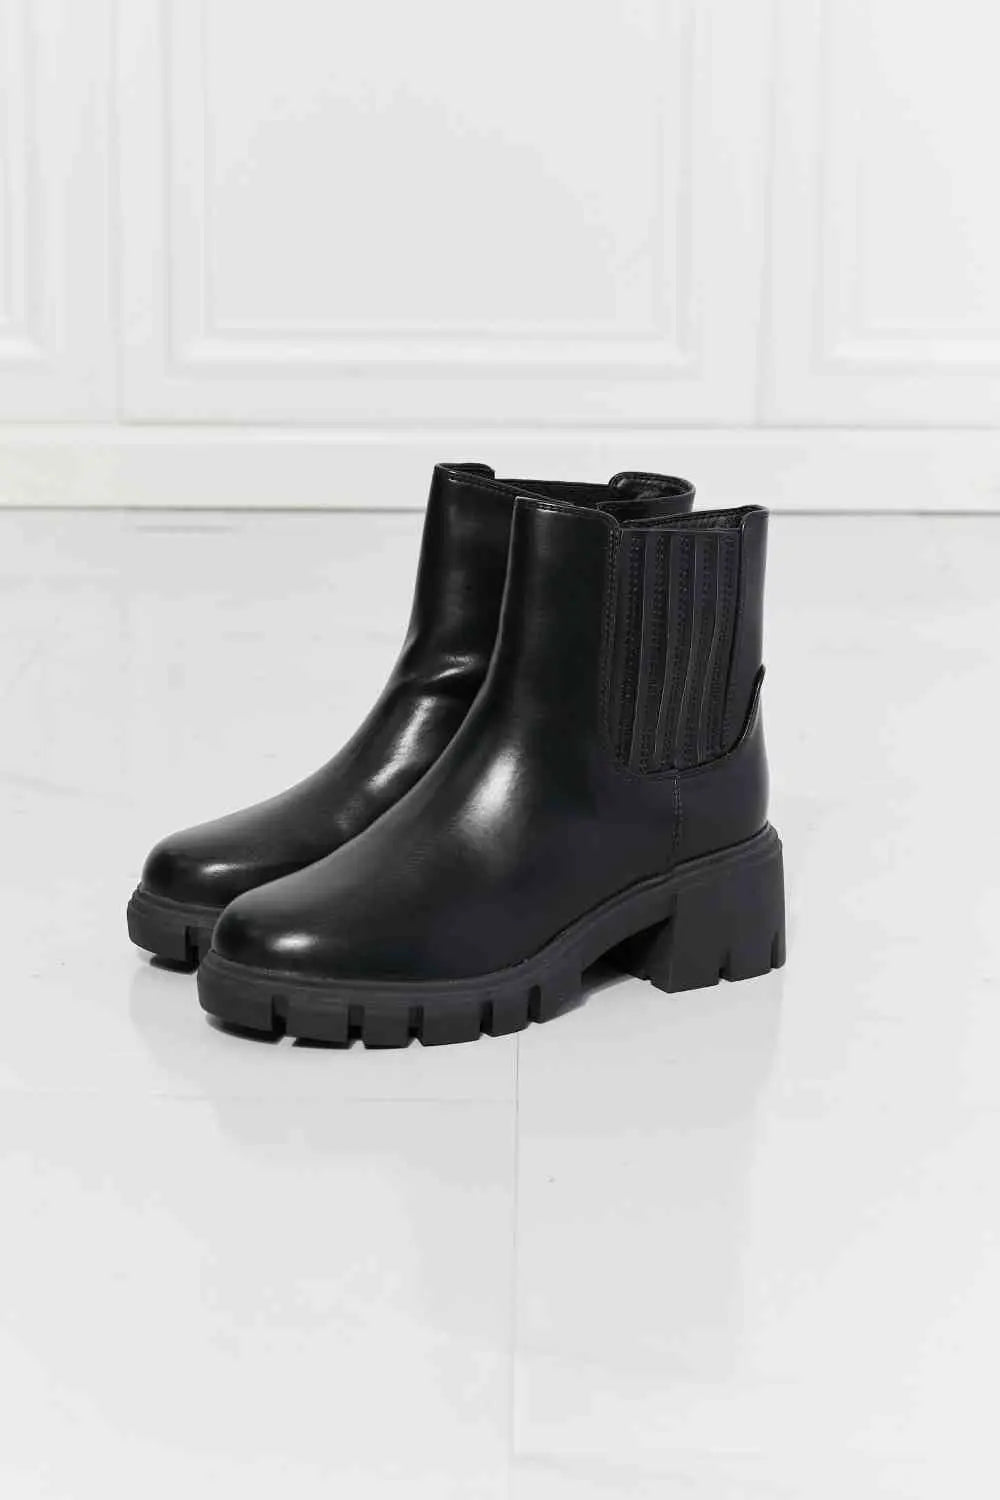 MMShoes What It Takes Lug Sole Chelsea Boots in Black - Image #6